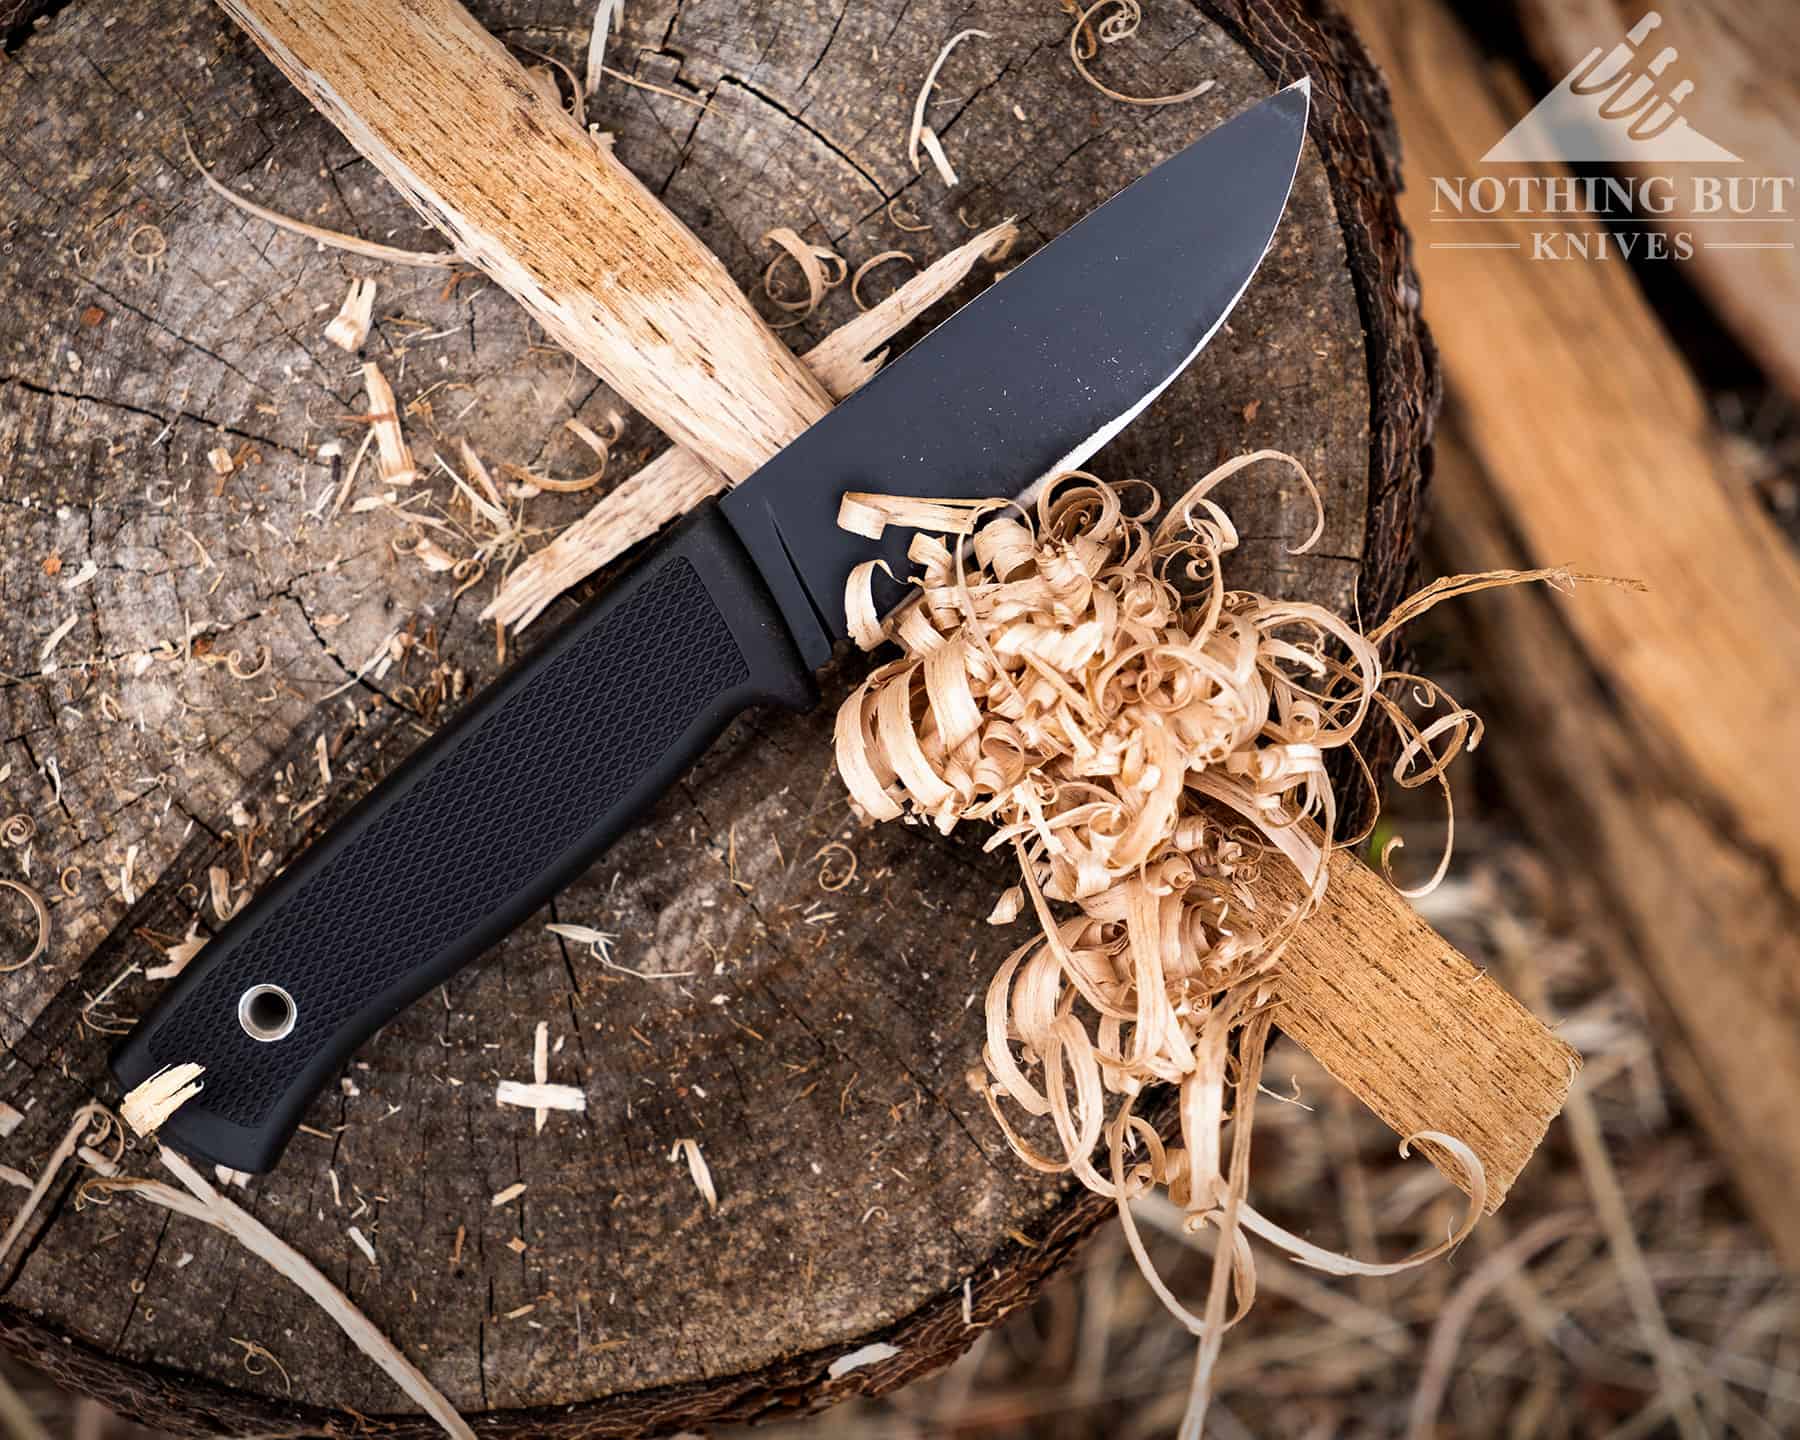 The Falkniven F1 handles most bushcraft tasks with ease including Feather sticking. 